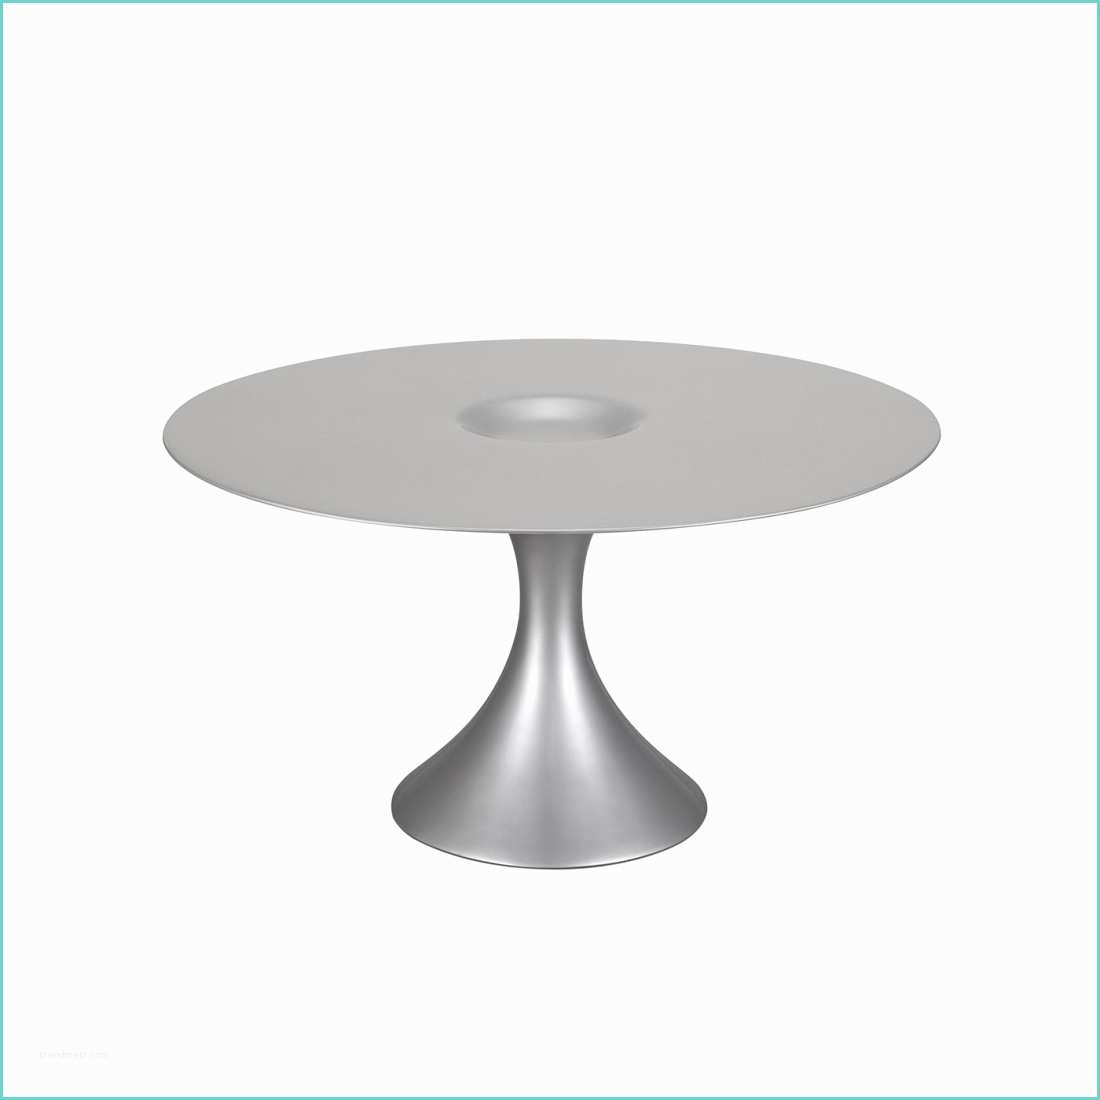 Table Salle A Manger Ronde Design Table Salle A Manger Ronde Gaeaforms Zendart Design